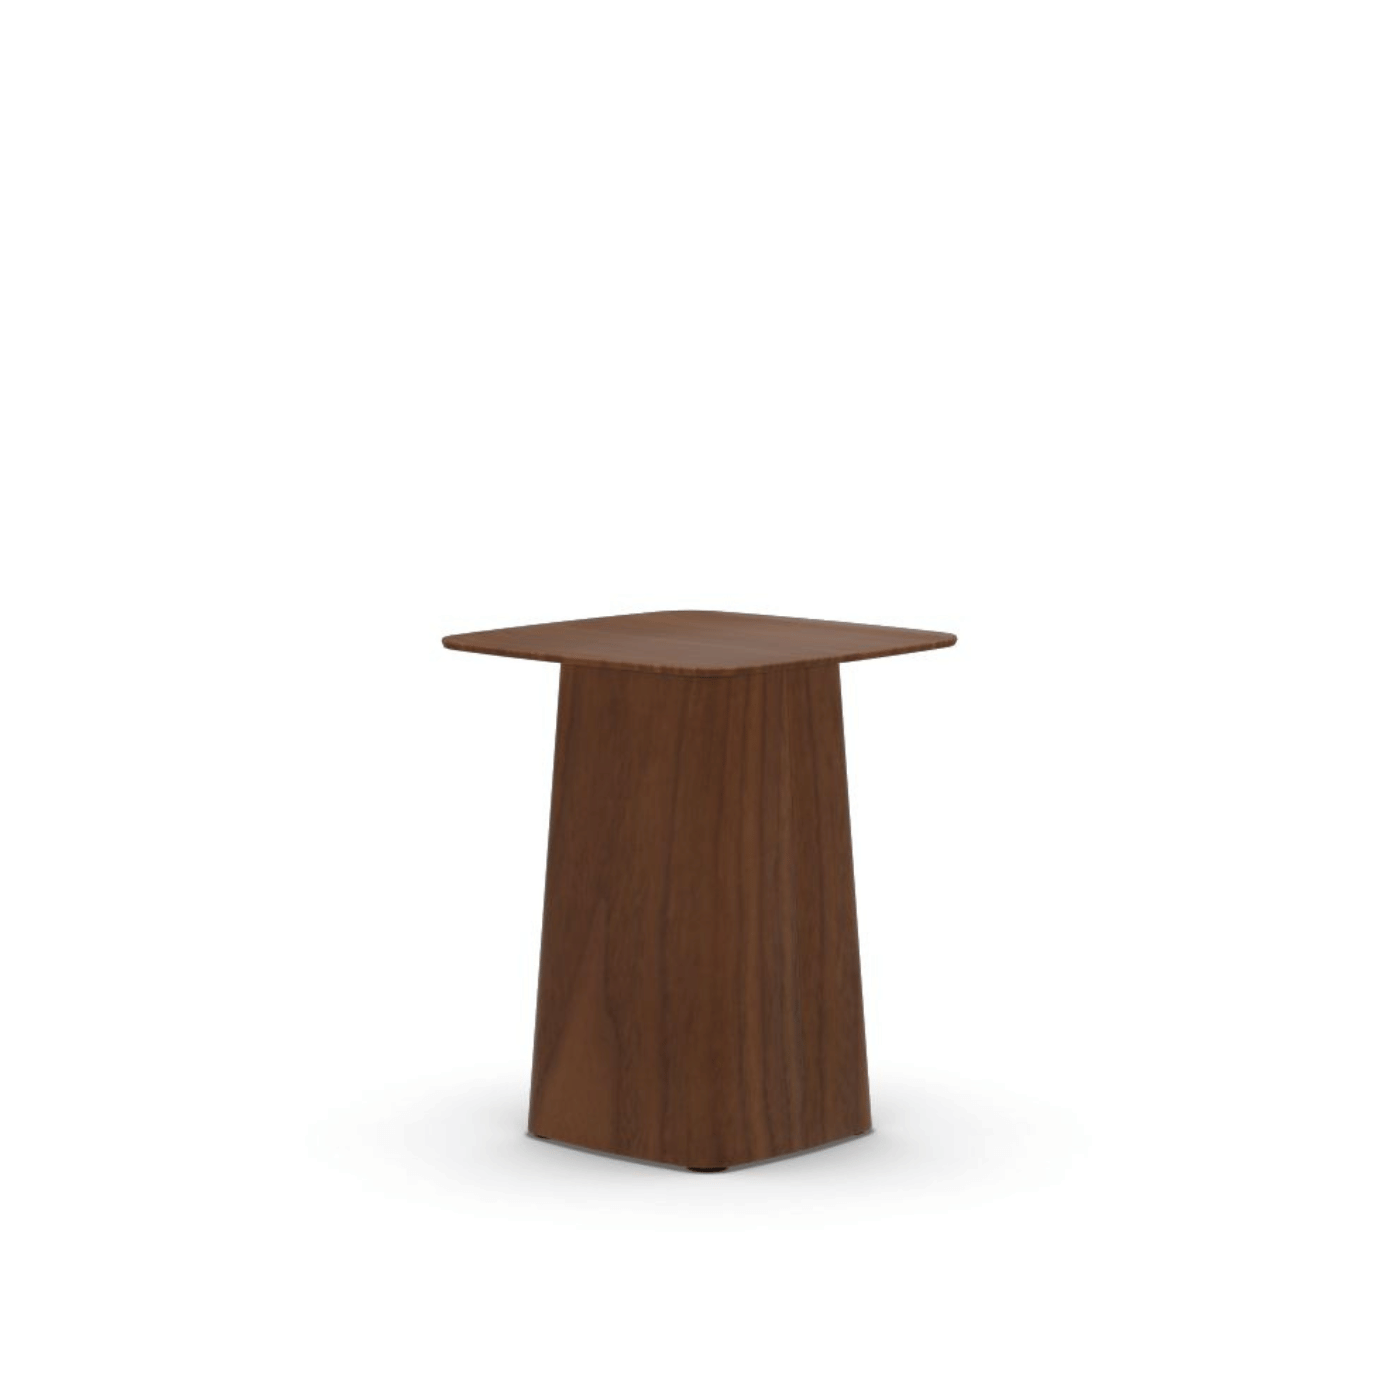 Vitra Wooden Side Table Small Black Pigmented Walnut Designer Furniture From Holloways Of Ludlow